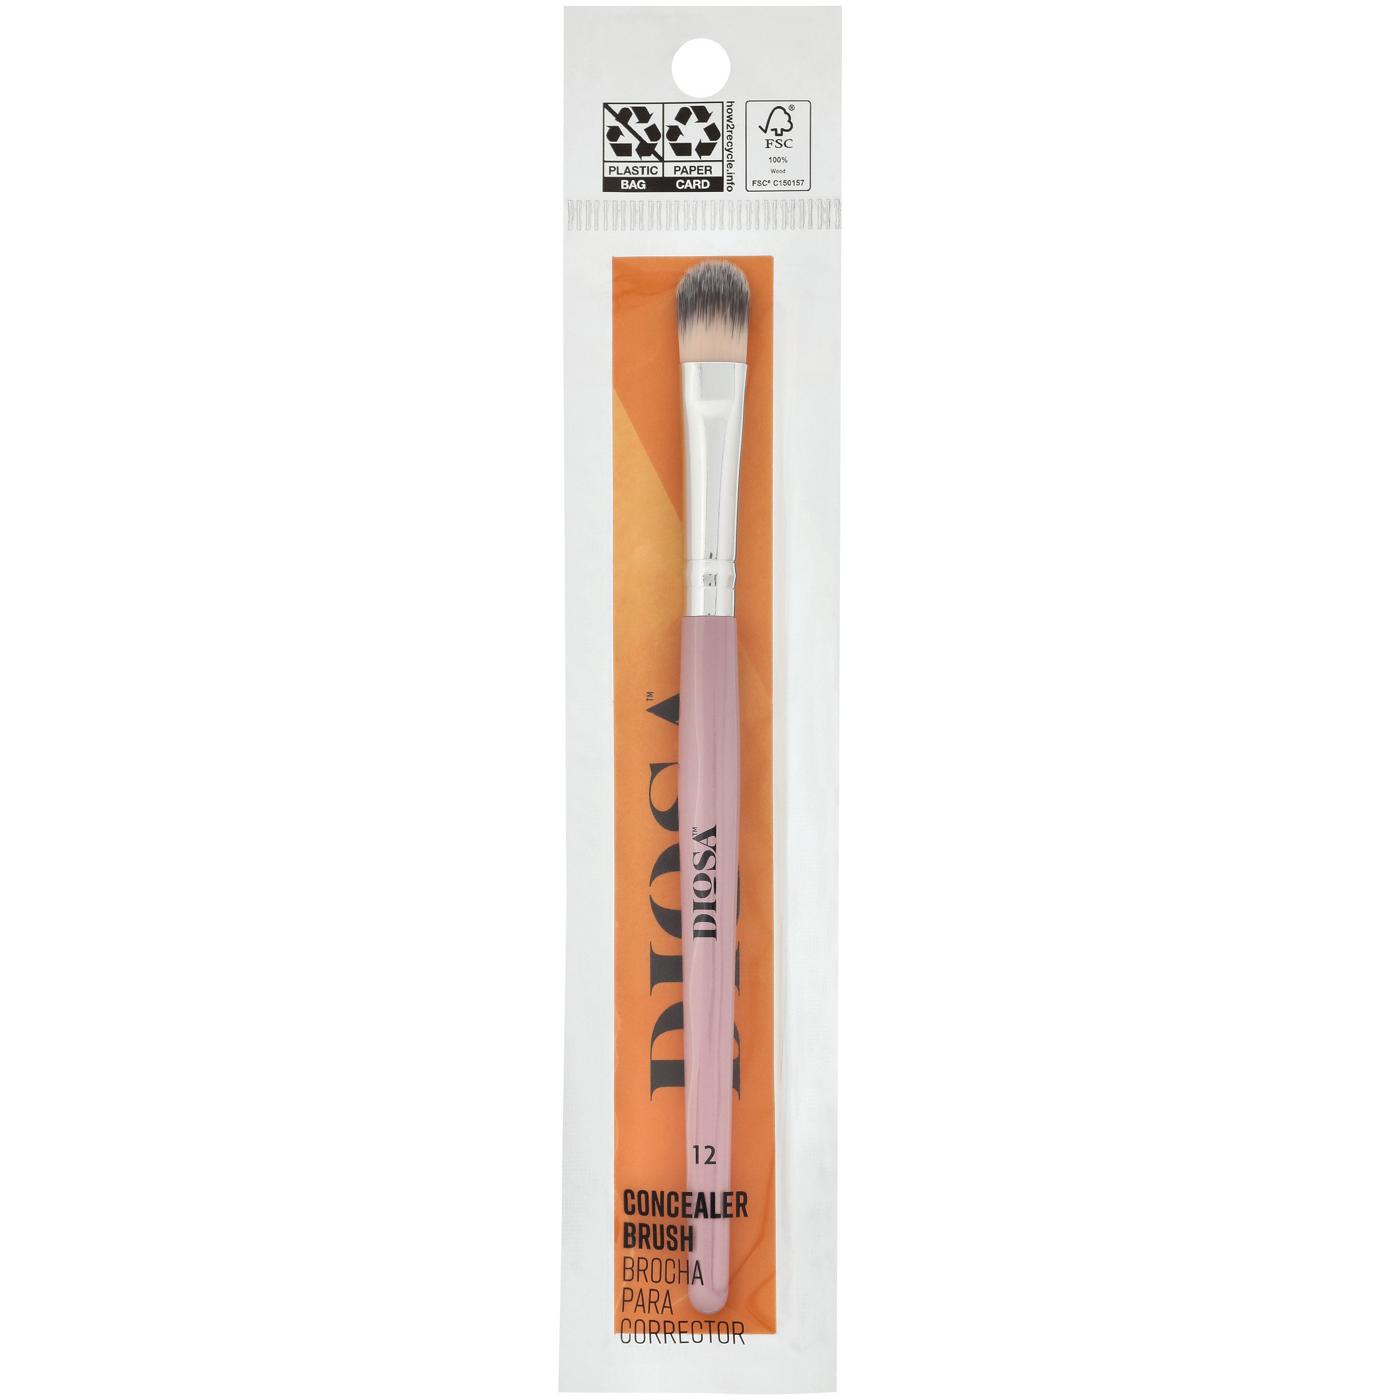 Diosa Concealer Brush - 12; image 1 of 2